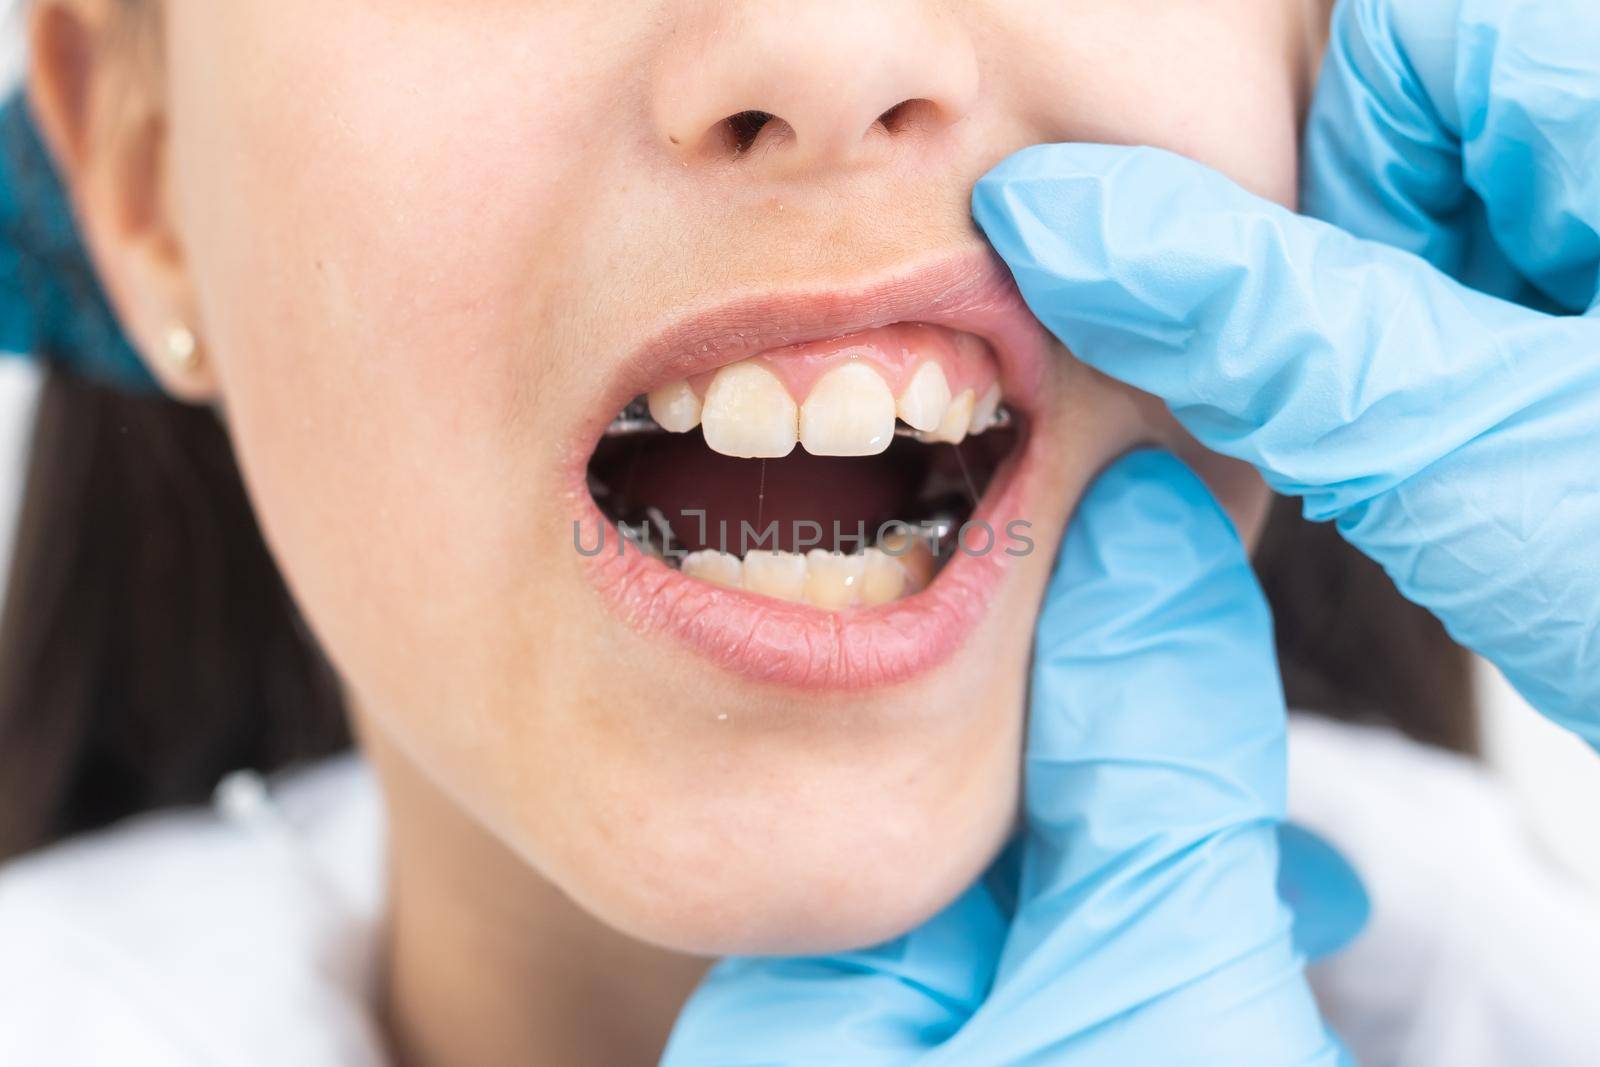 Girl putting on medical braces for orthodontic treatment over white